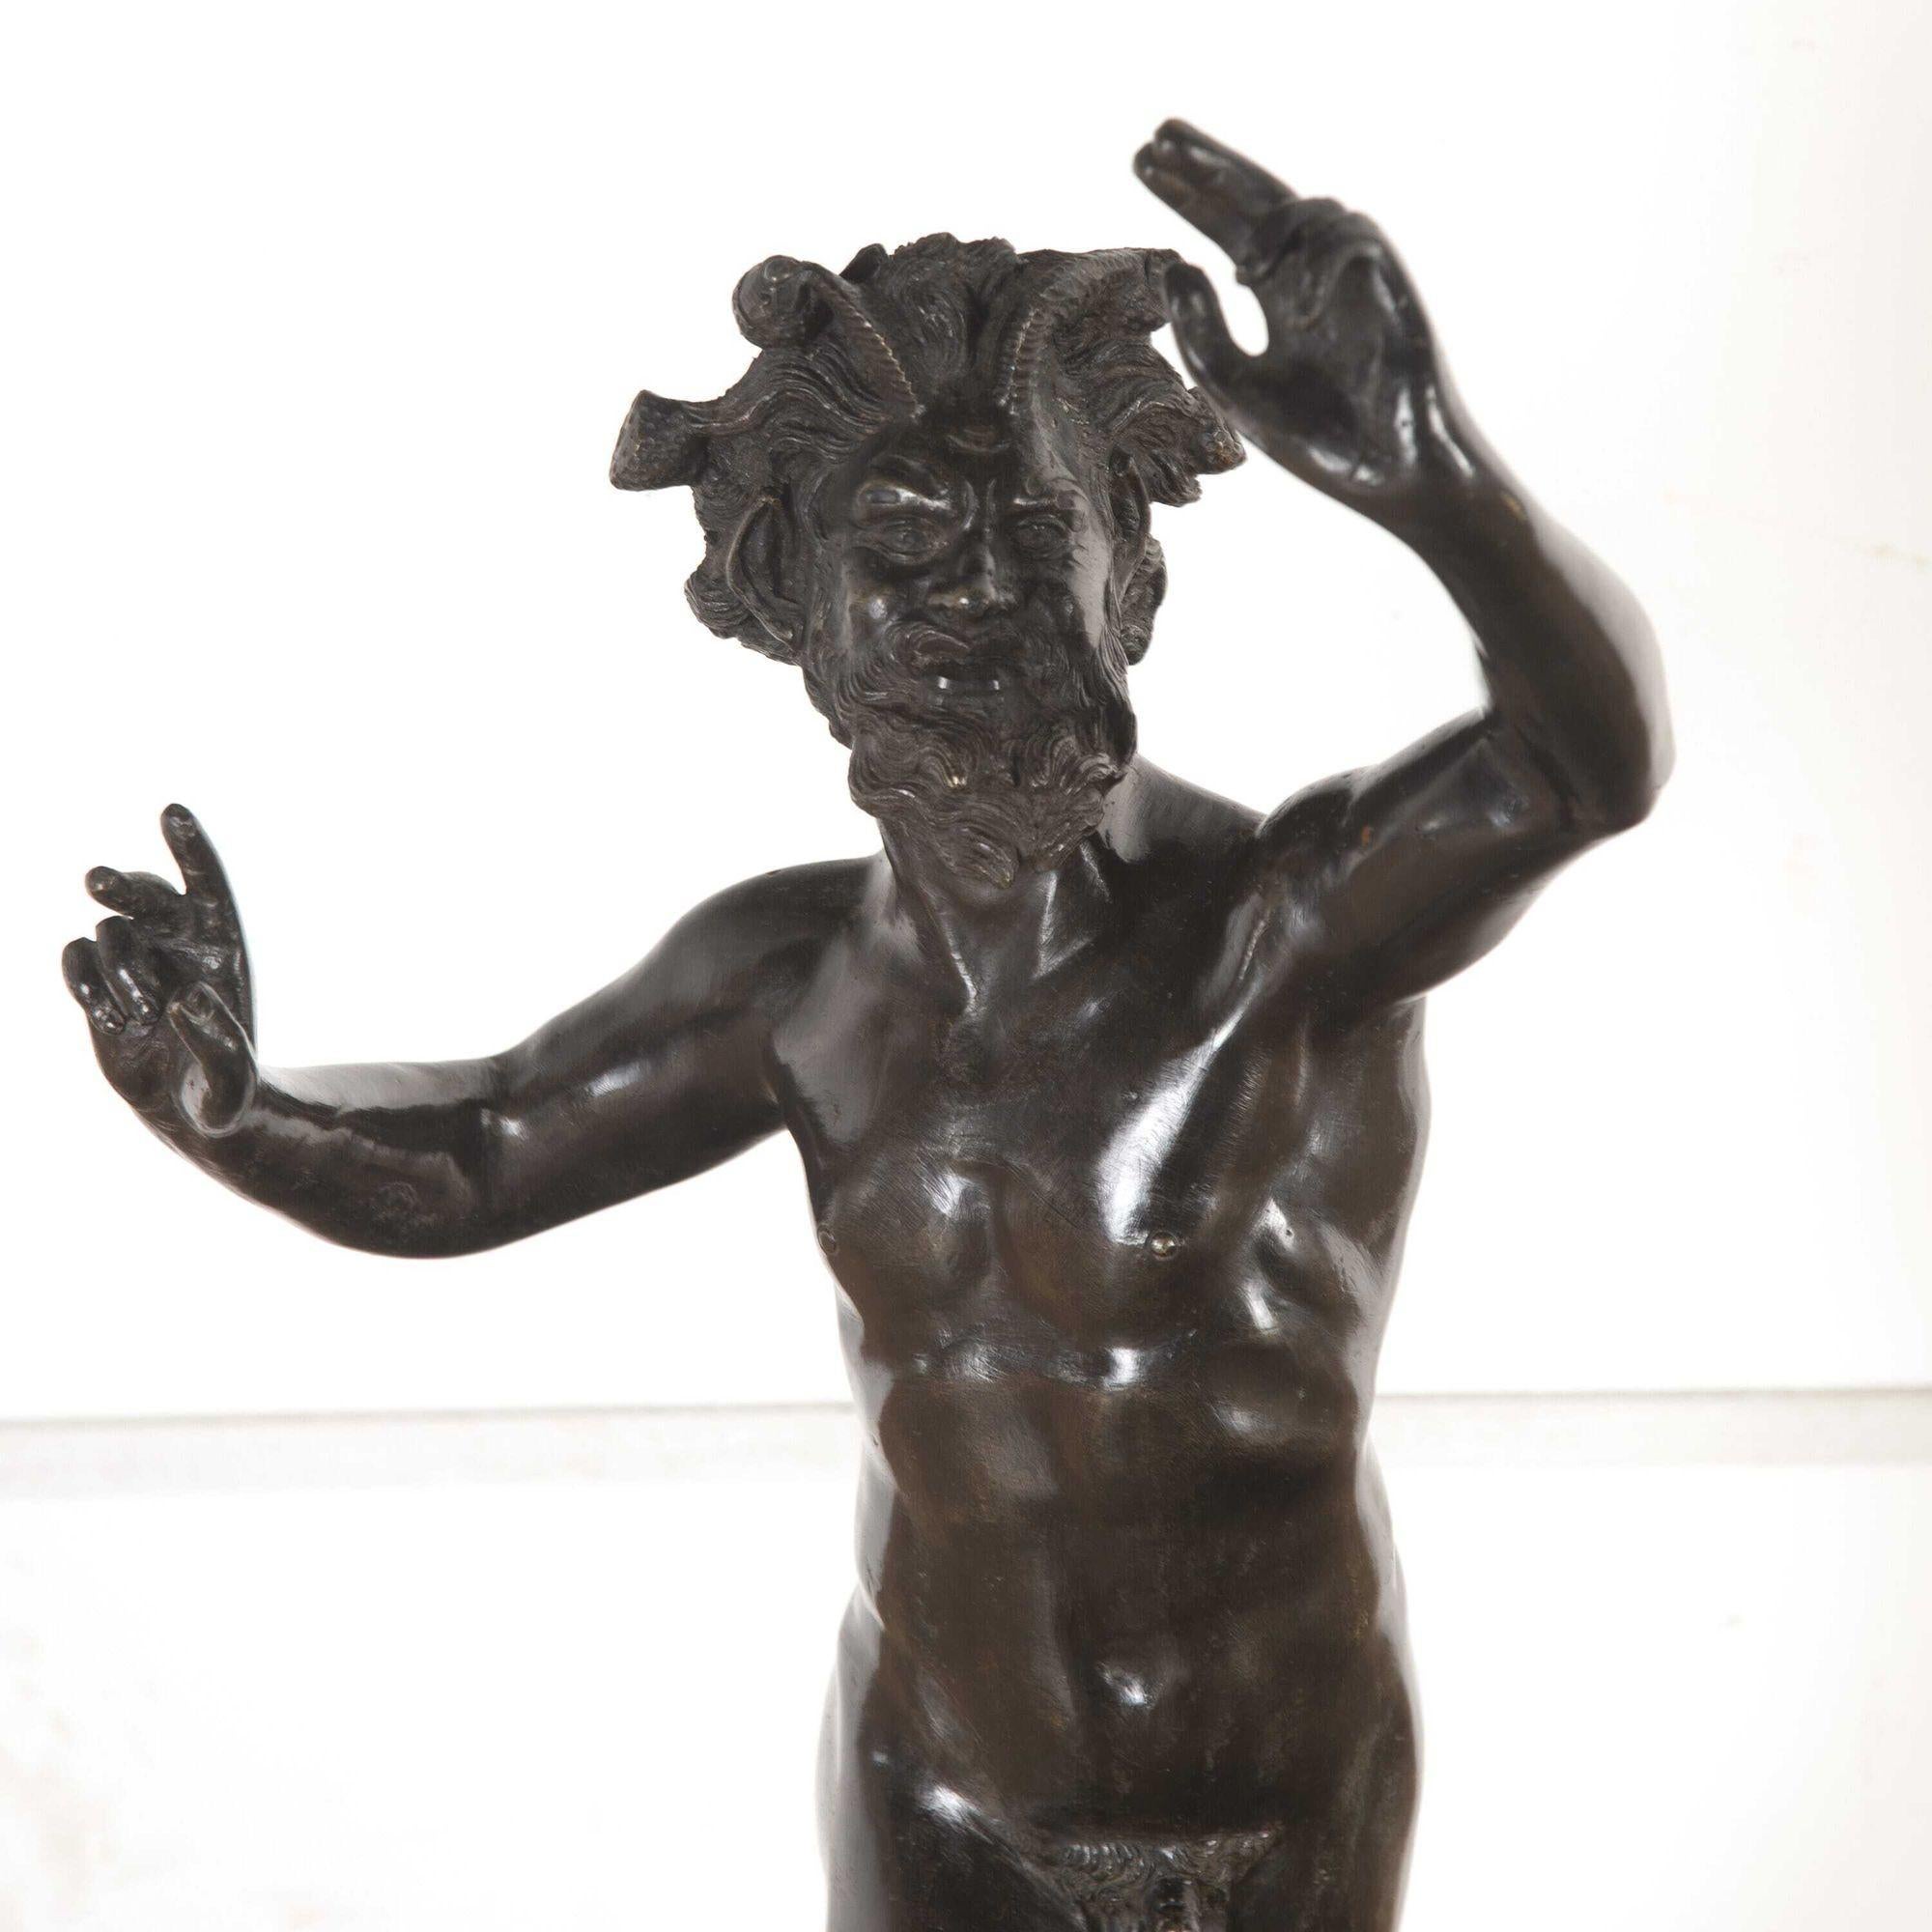 Classic and well-modelled sculpture of a dancing faun.